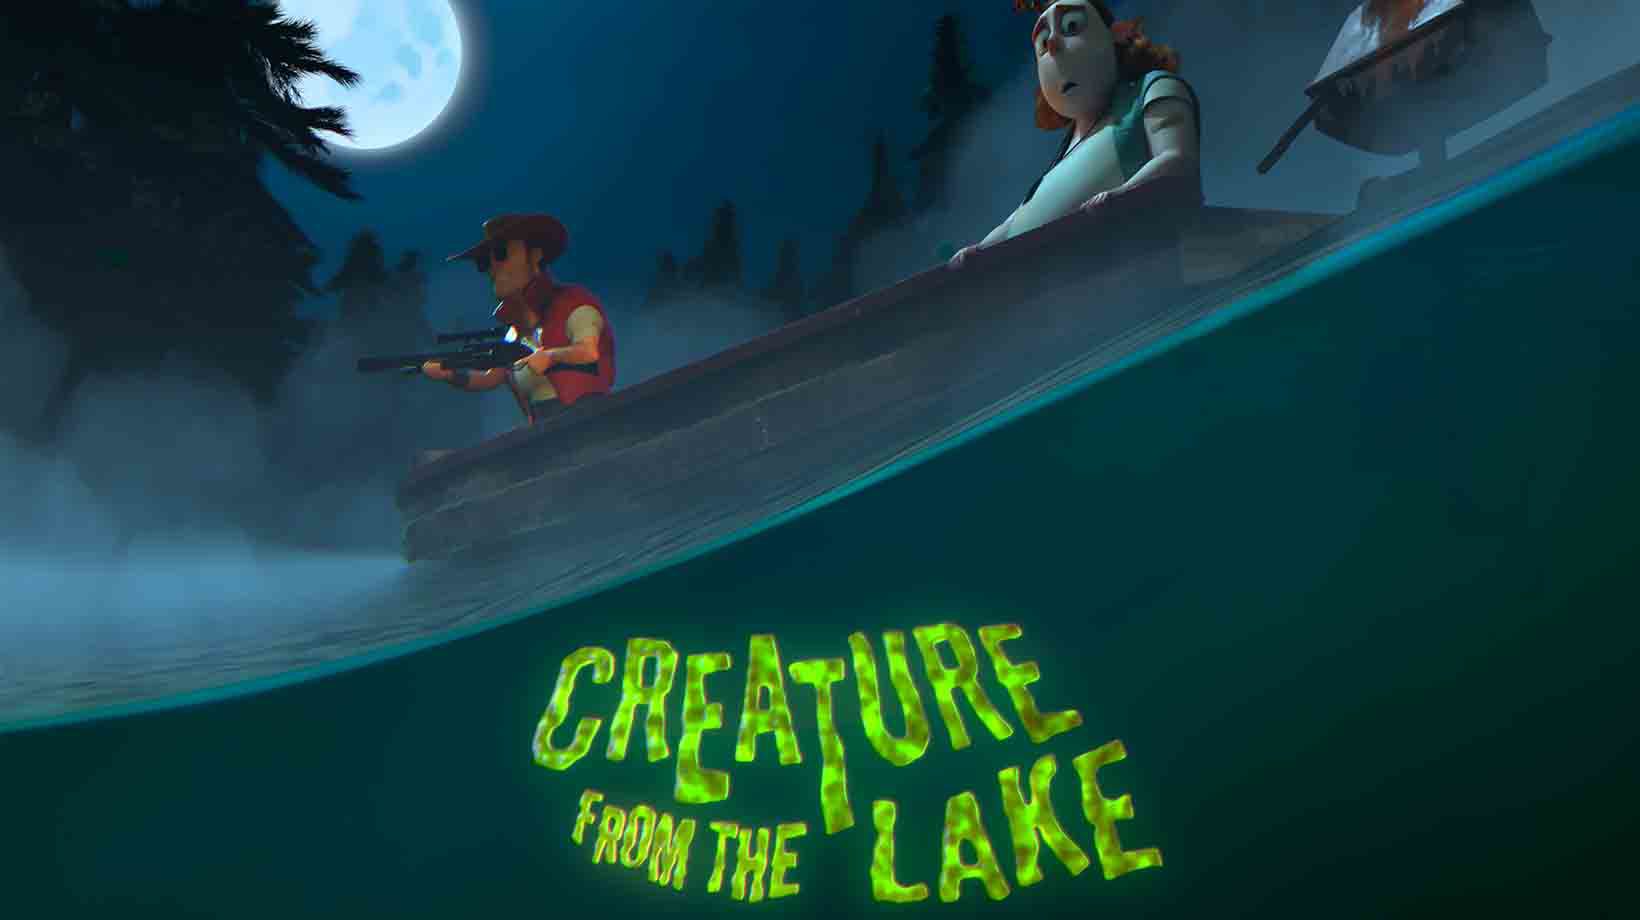 Creature from the lake